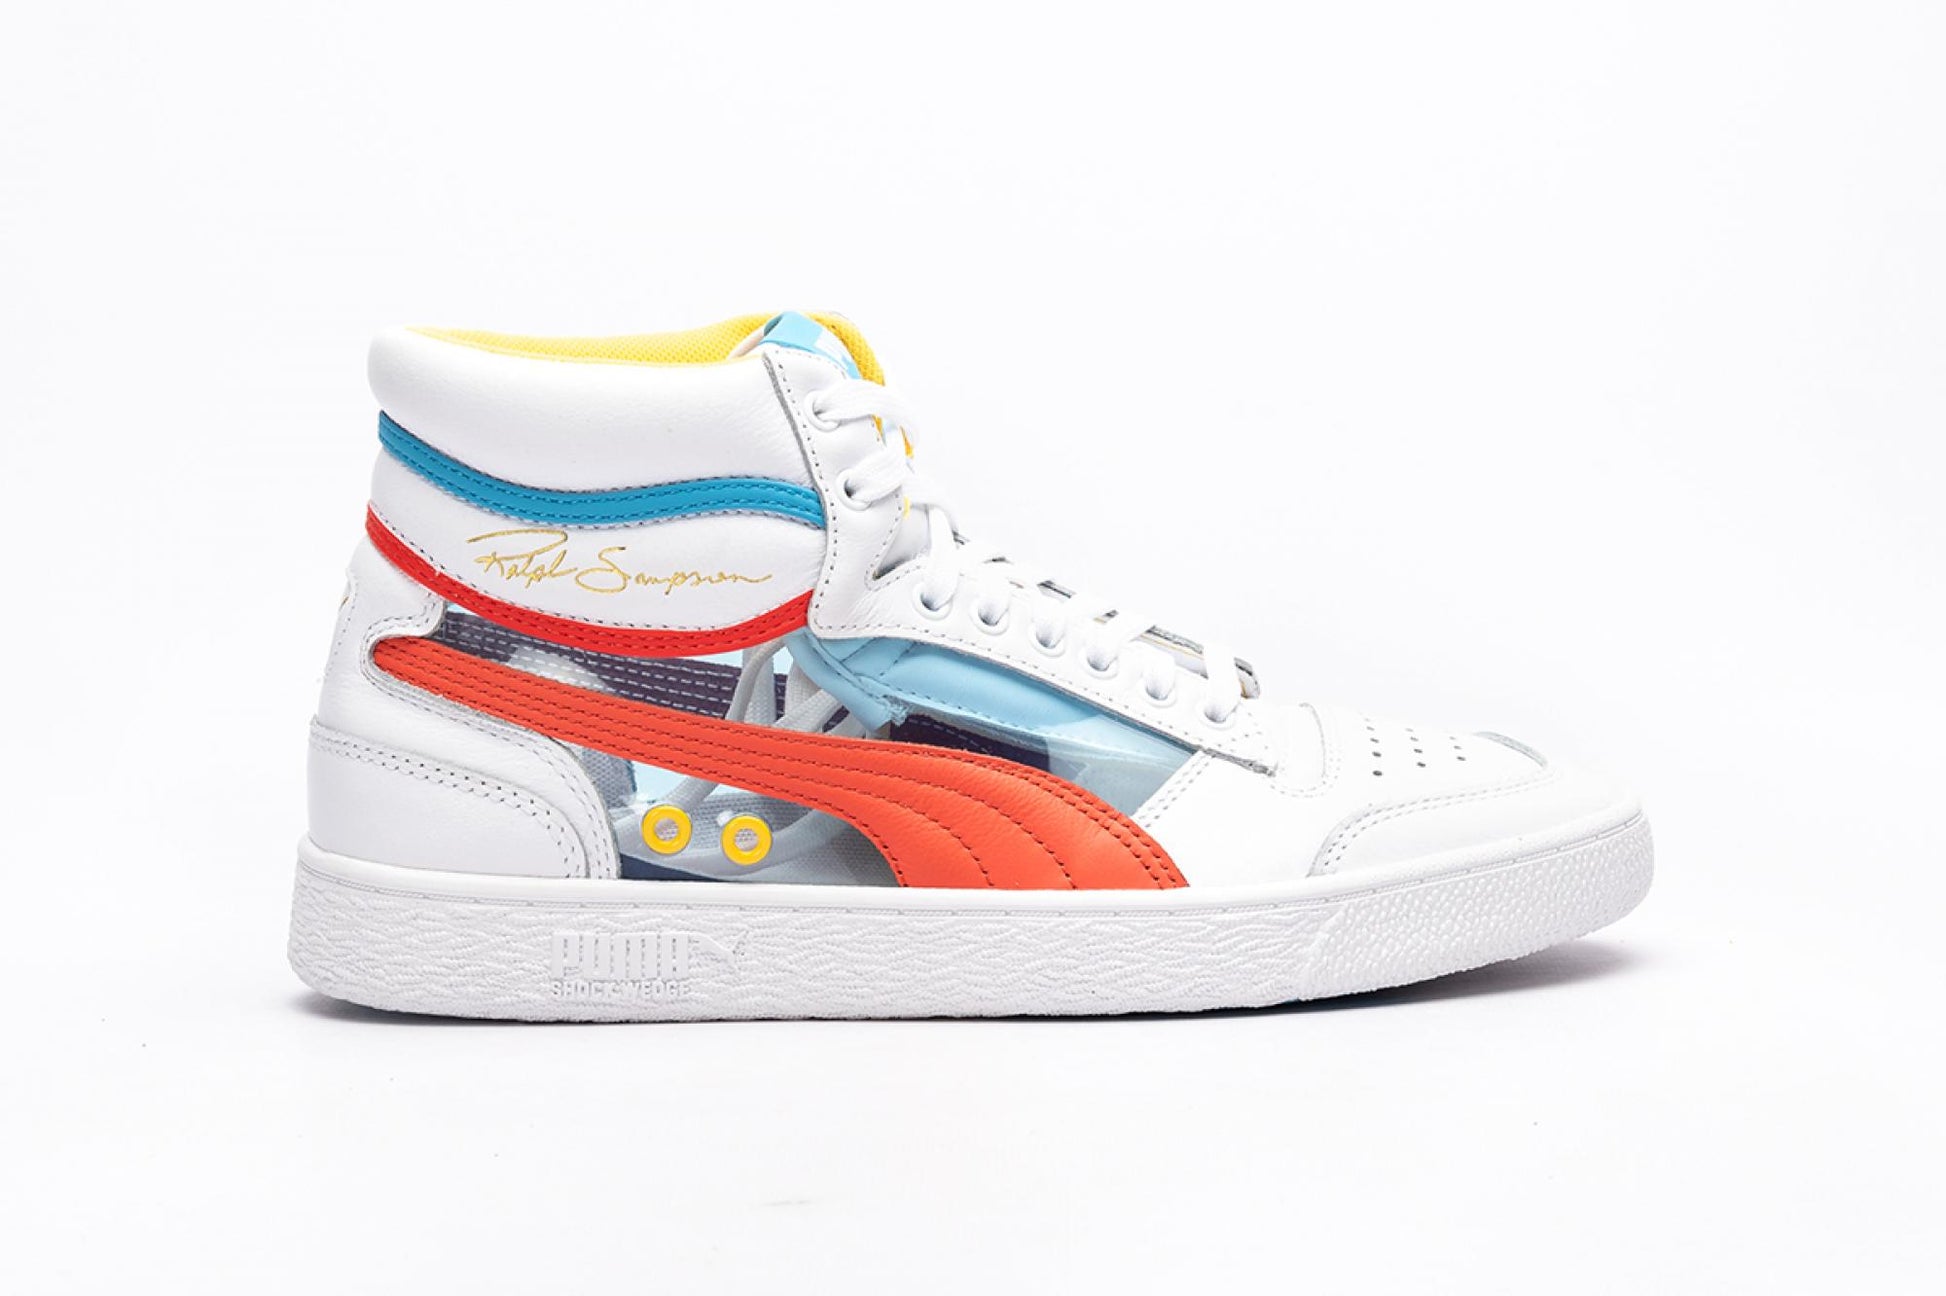 PUMA RALPH SAMPSON MID "GLASS" LTD - WHITE / HOT CORAL / ETHEREAL BLUE freeshipping - FREESTYLE LLORET